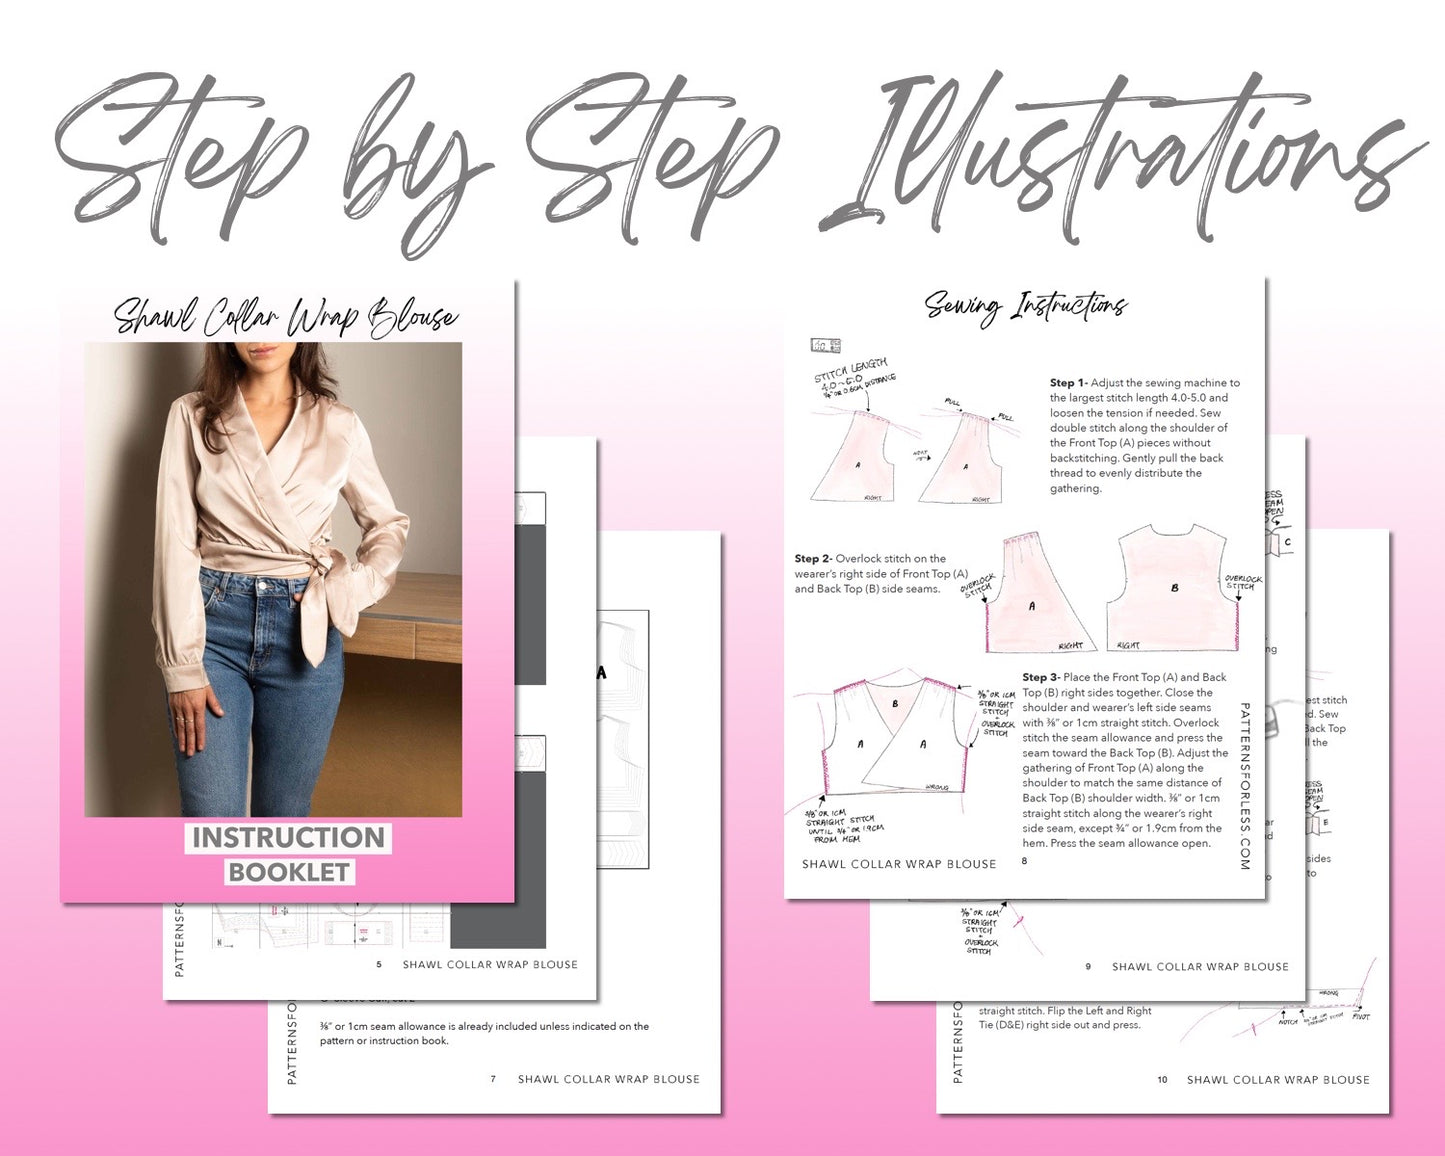 Shawl Collar Wrap Blouse sewing pattern step by step illustrations.